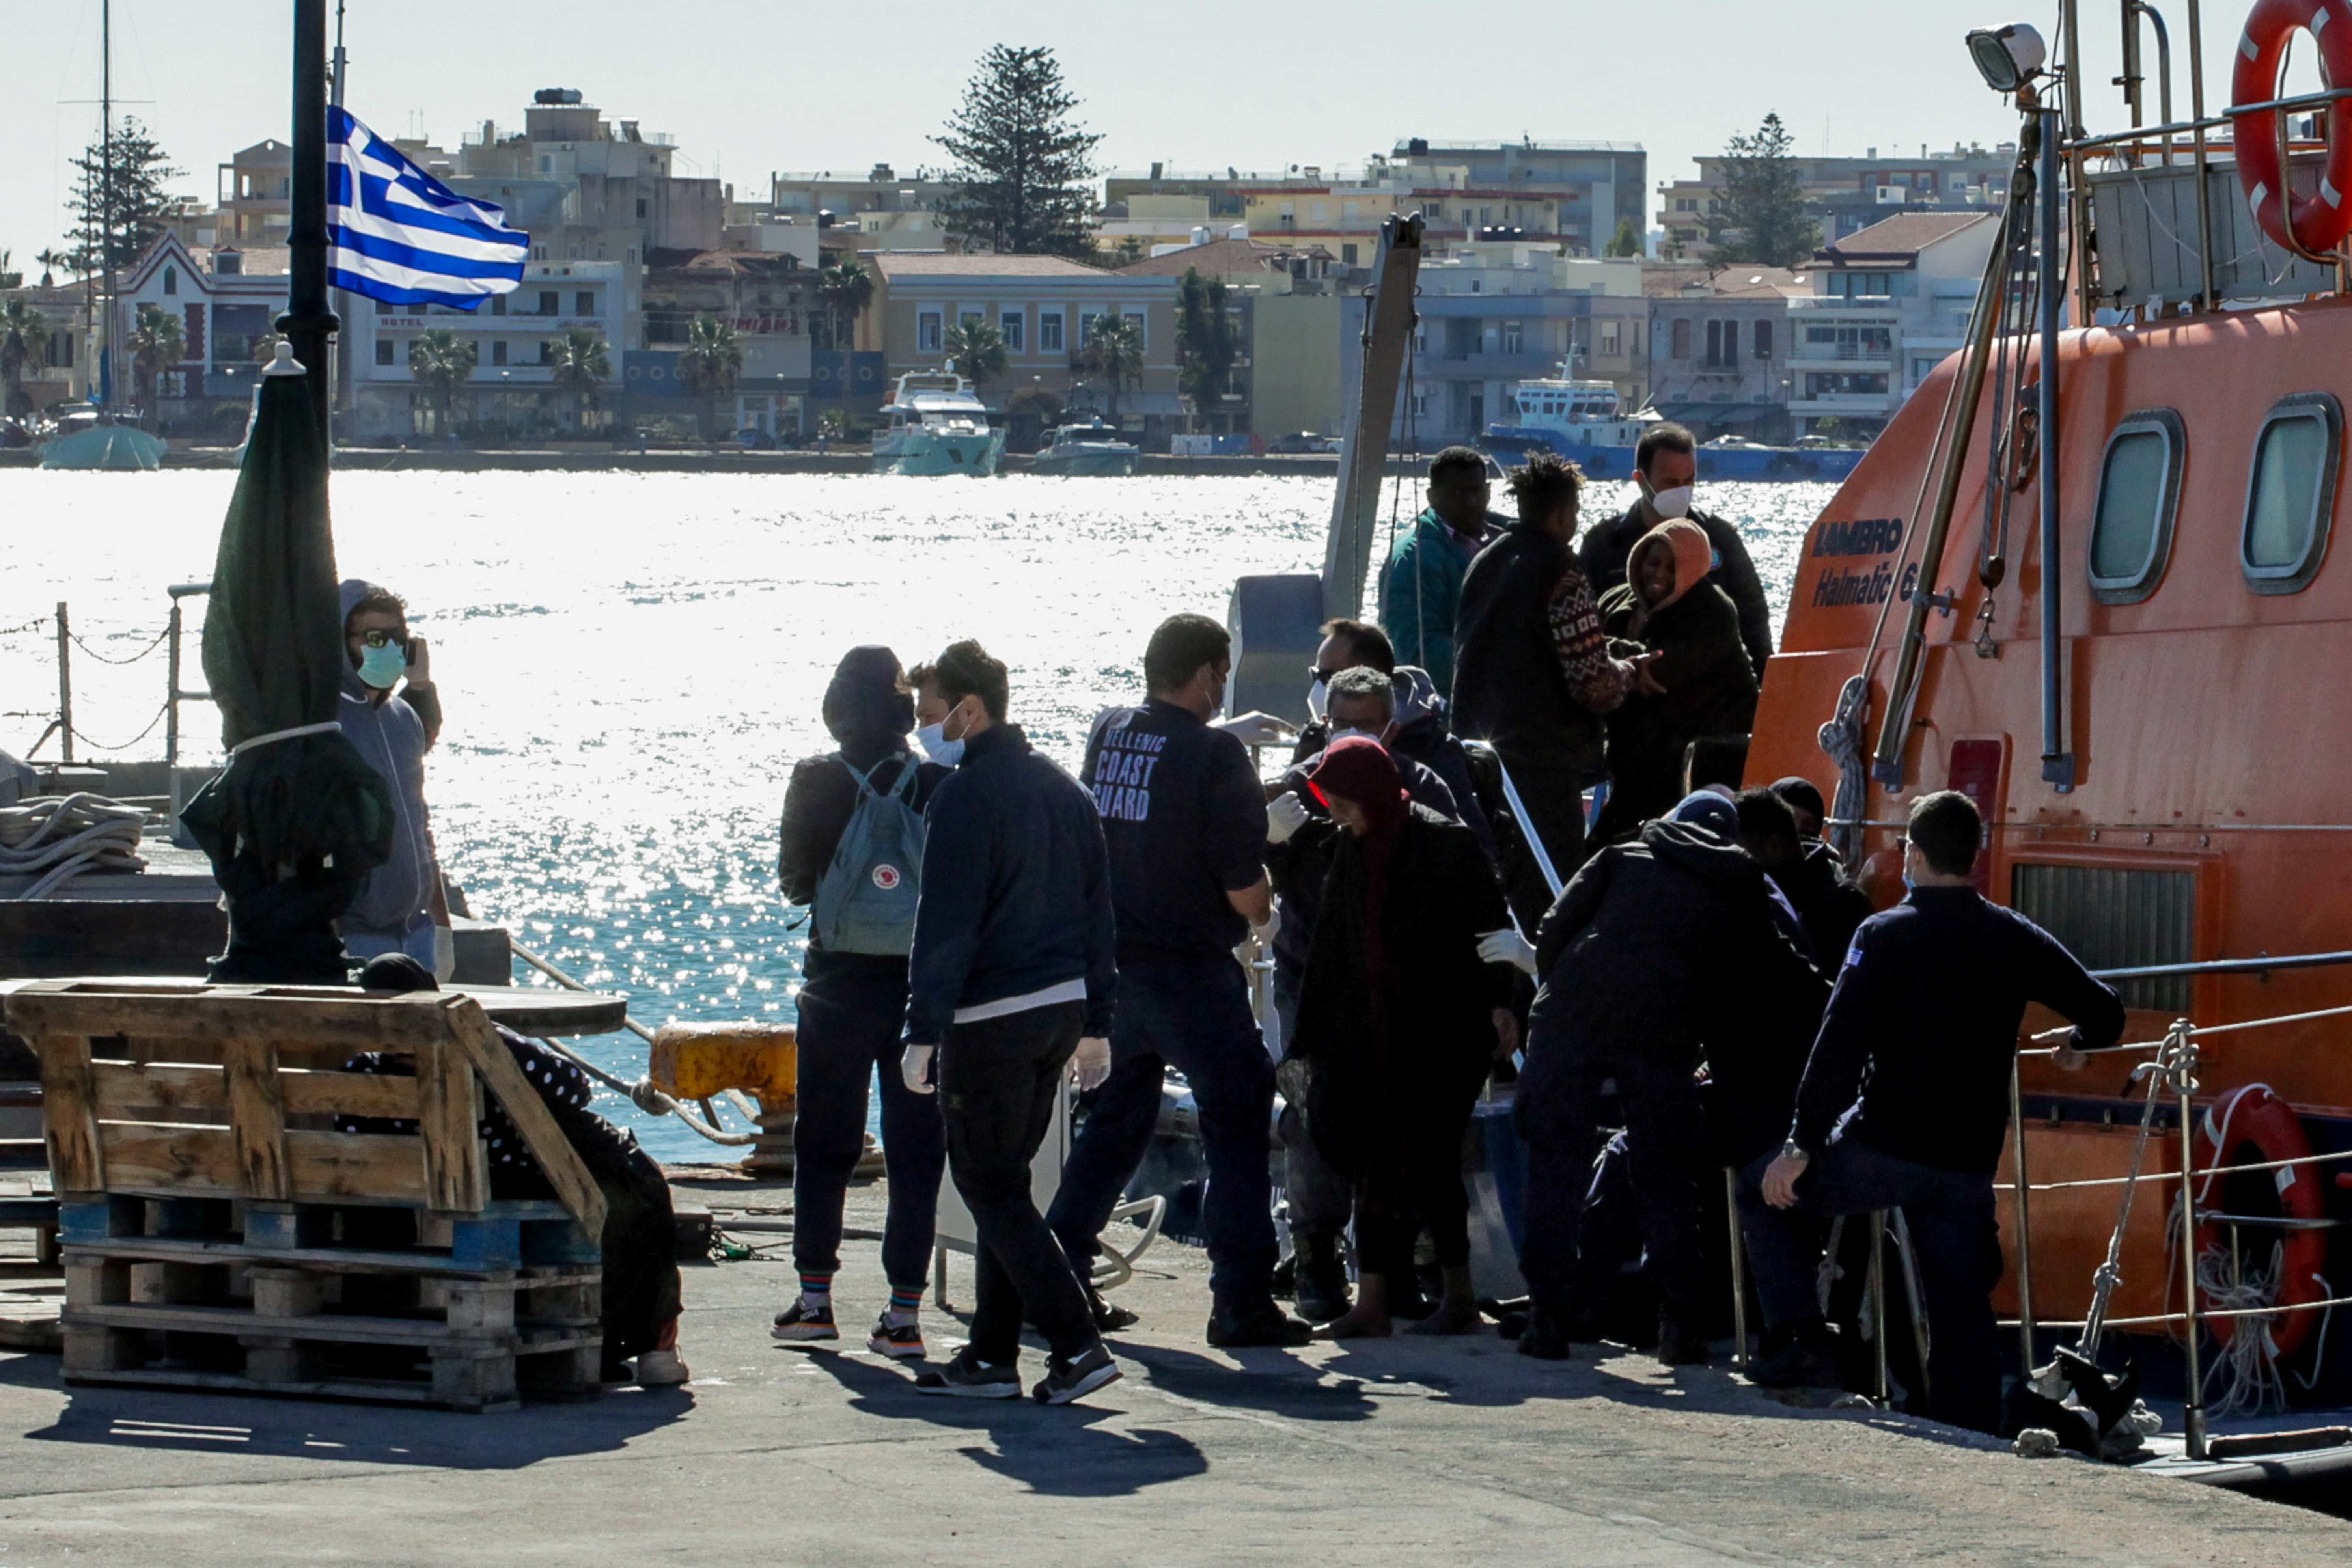 Migrants disembark a Hellenic Coast Guard vessel after being rescued at open sea, on the island of Chios, Greece, October 26, 2021. Dimitris Vouchouris/Eurokinissi via REUTERS 